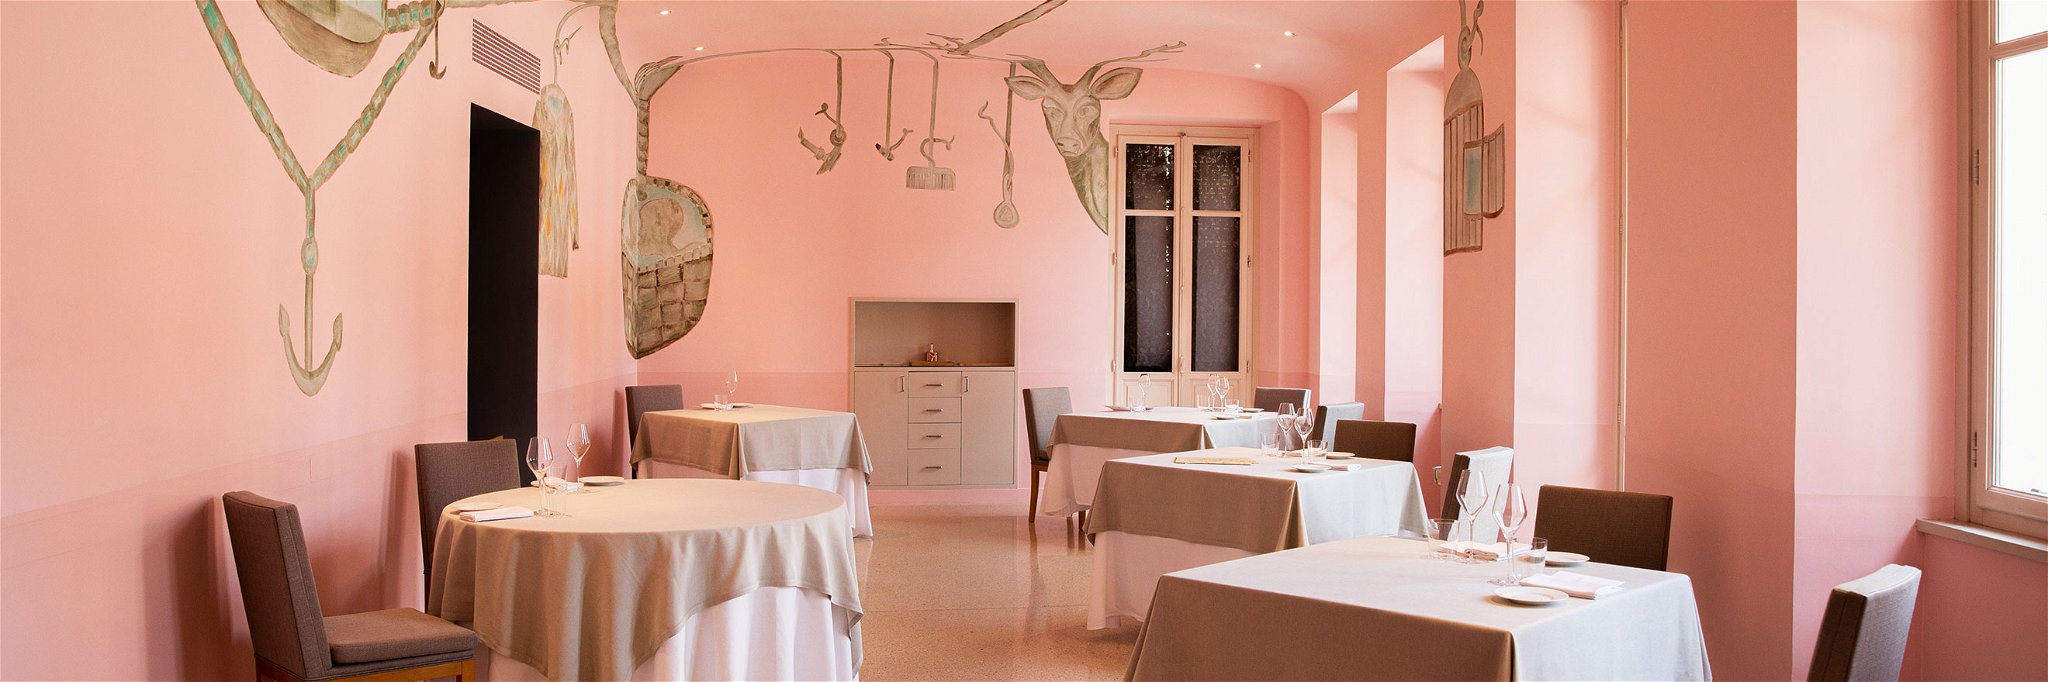 The dining room of Piazza Duomo in Alba, decorated in delicate pink.